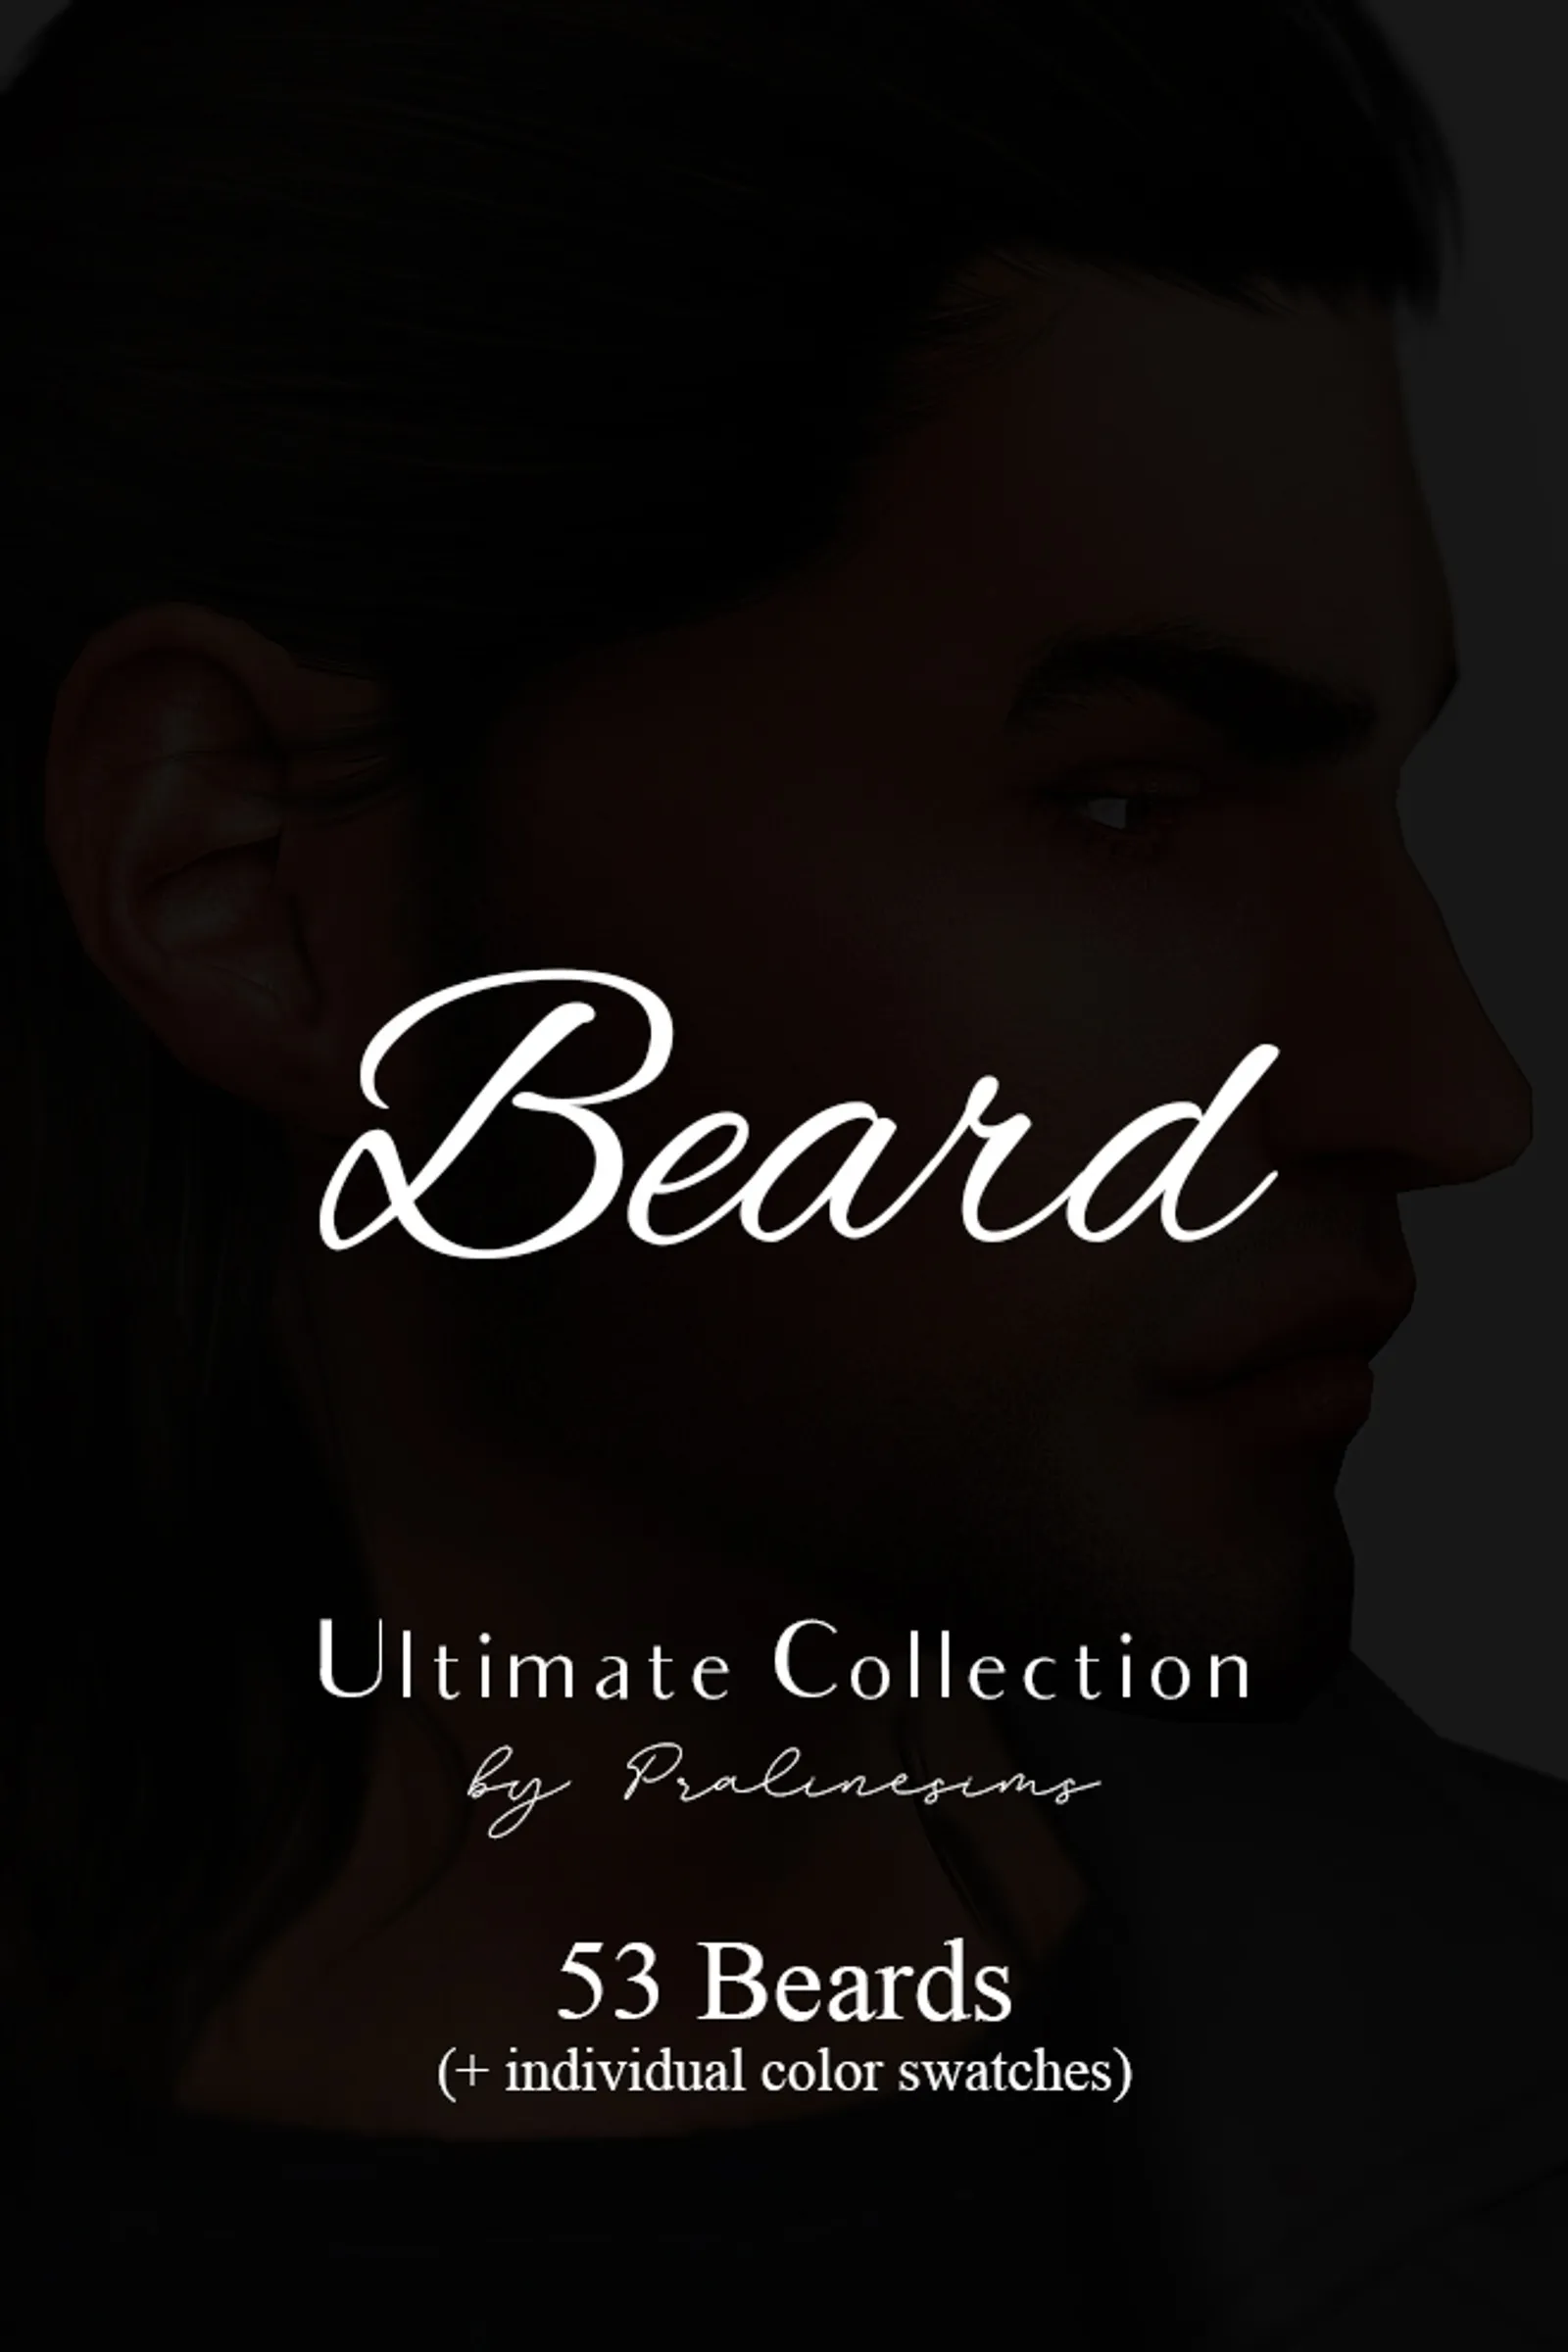 BEARD Ultimate Collection